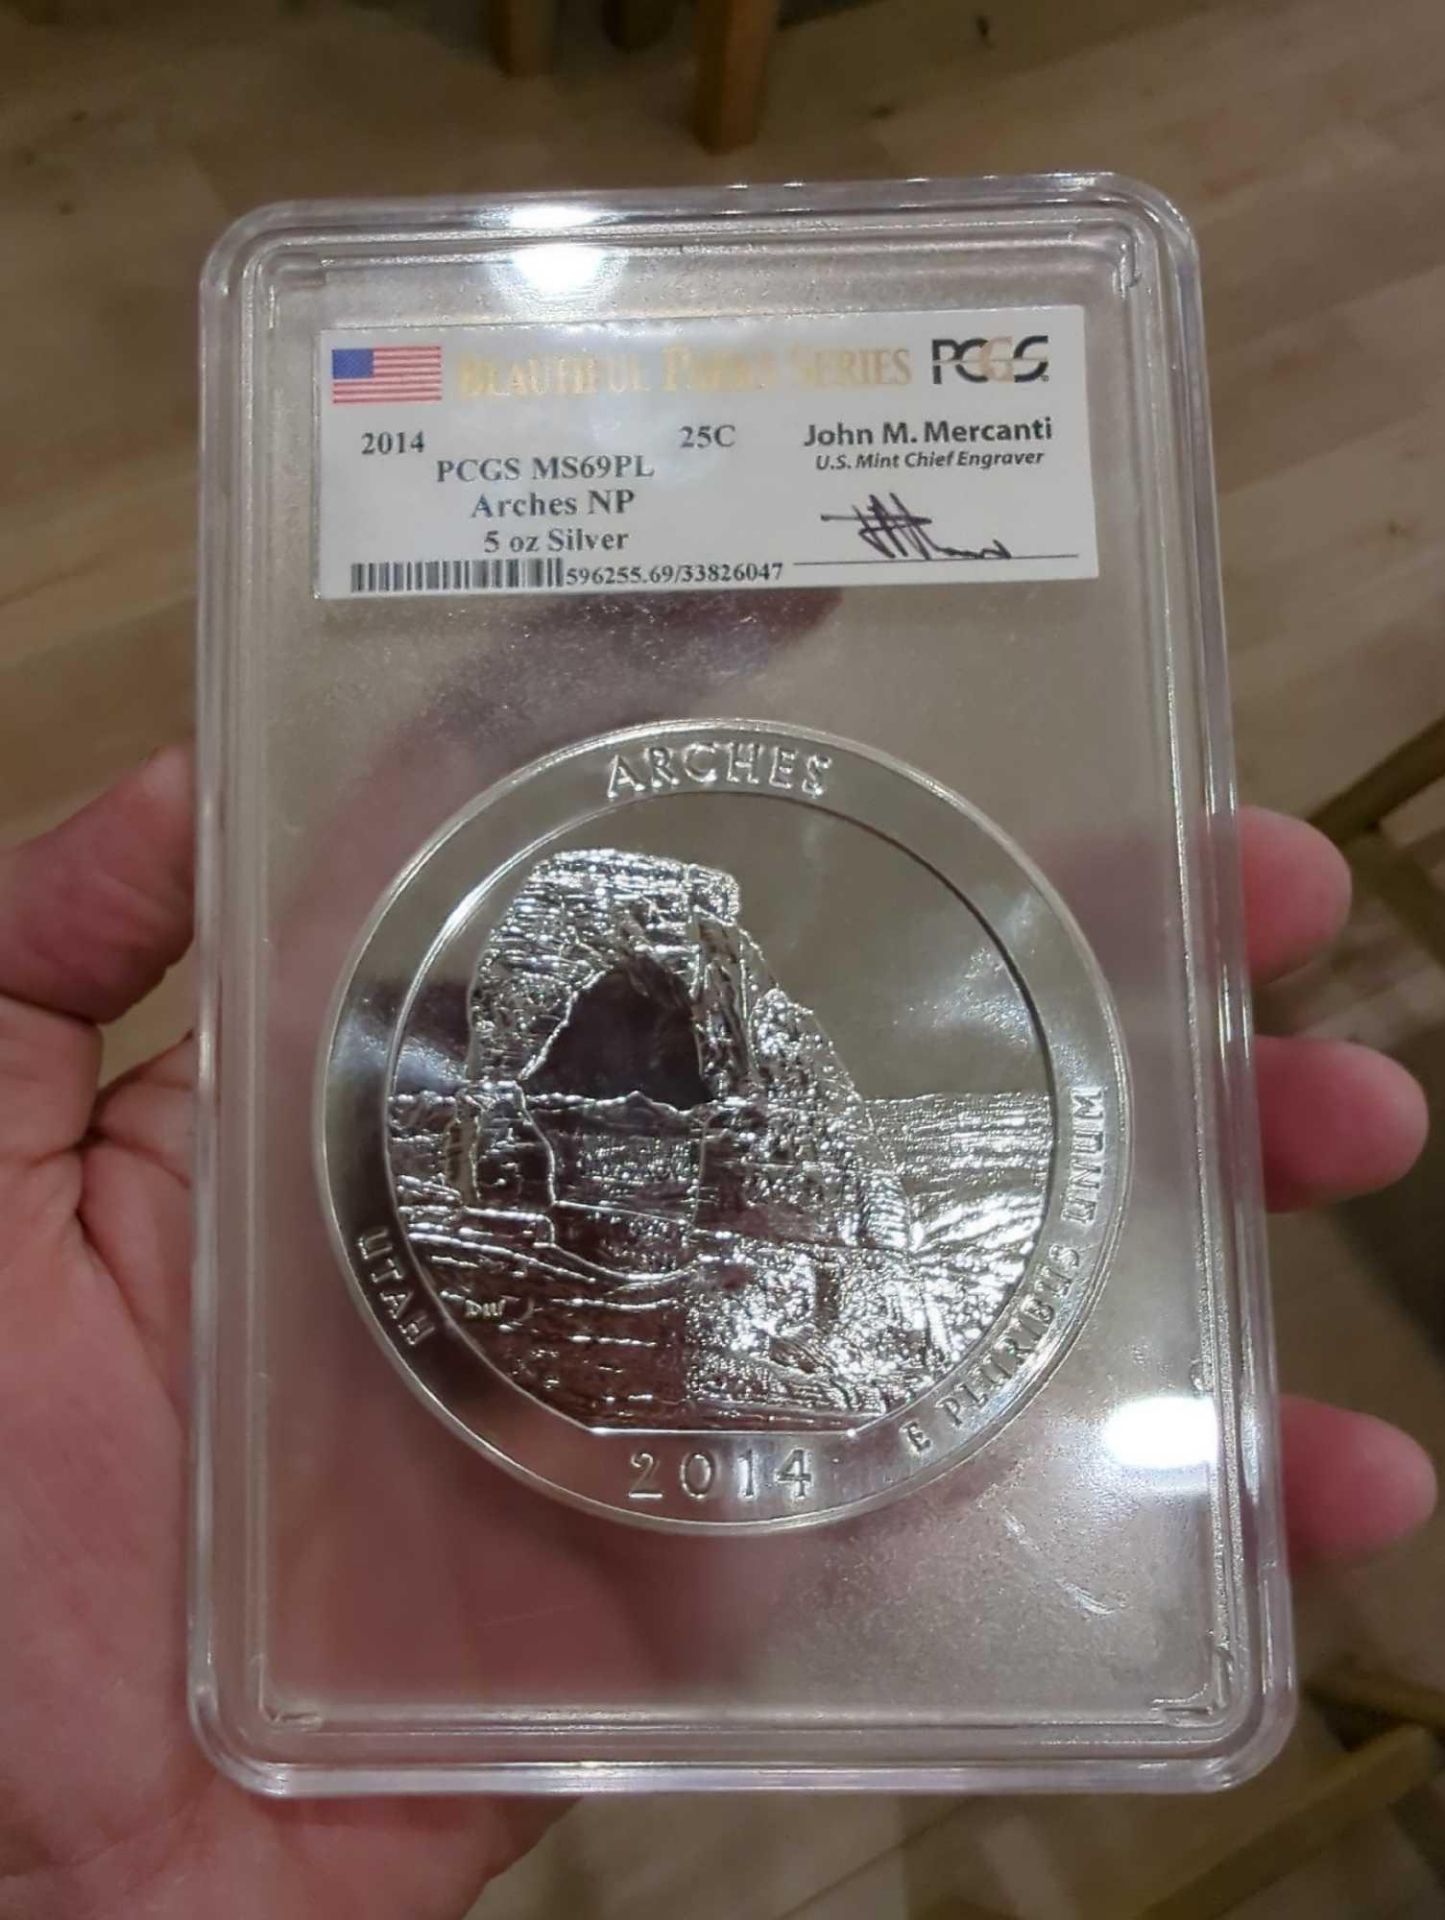 PCGS MS69PL Arches NP 5 oz Silver Signed